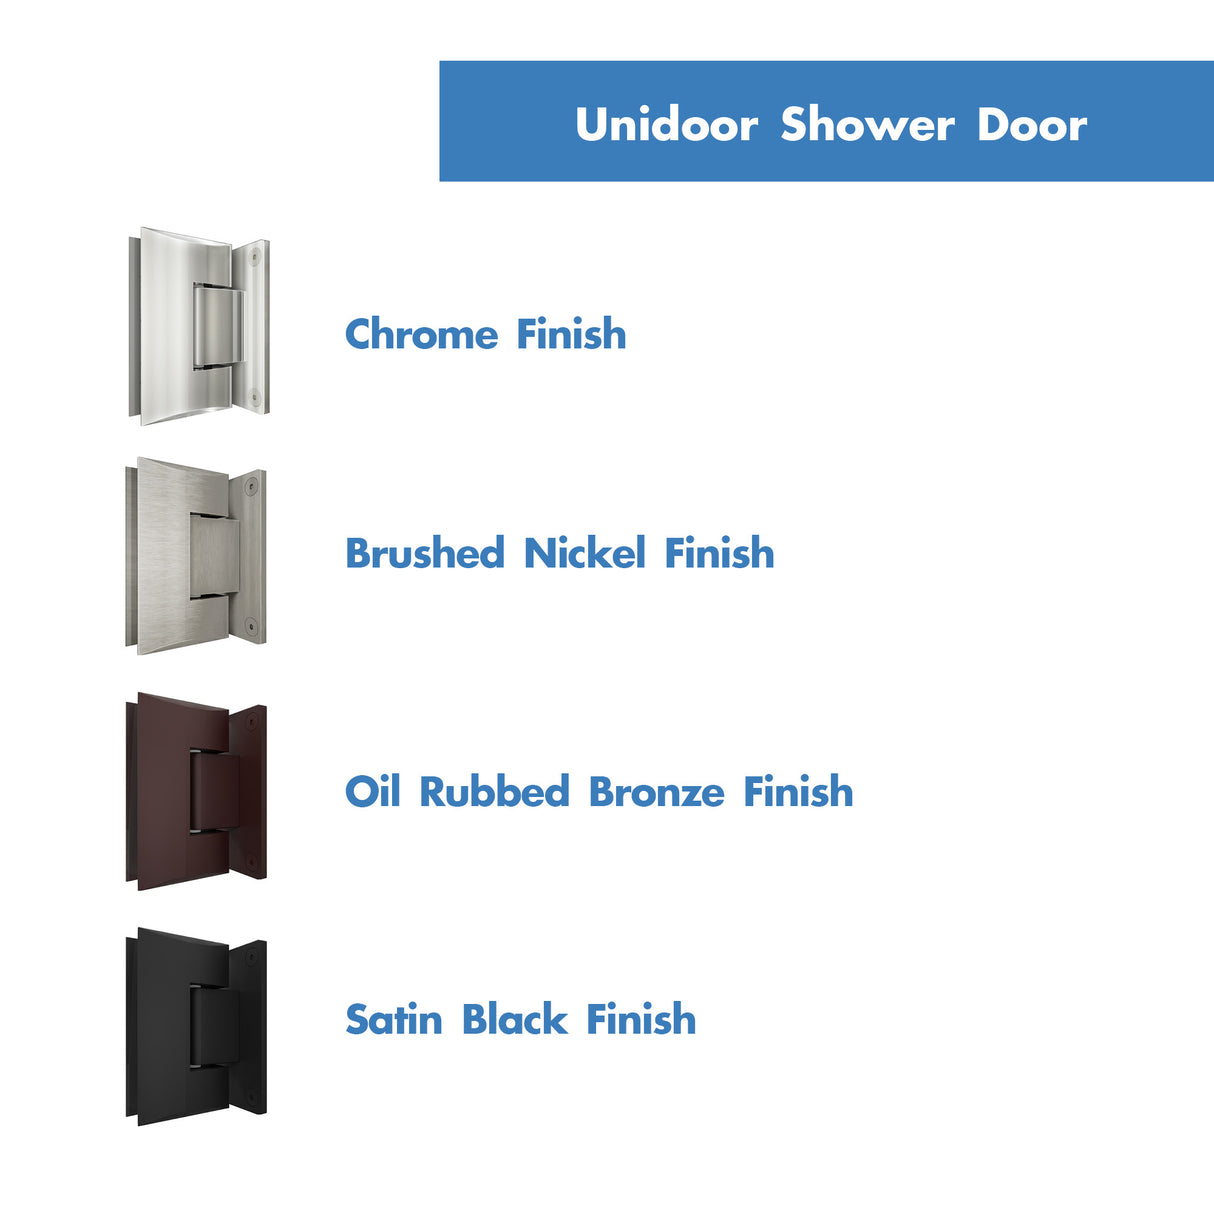 DreamLine Unidoor Plus 40 in. W x 34 3/8 in. D x 72 in. H Frameless Hinged Shower Enclosure in Chrome